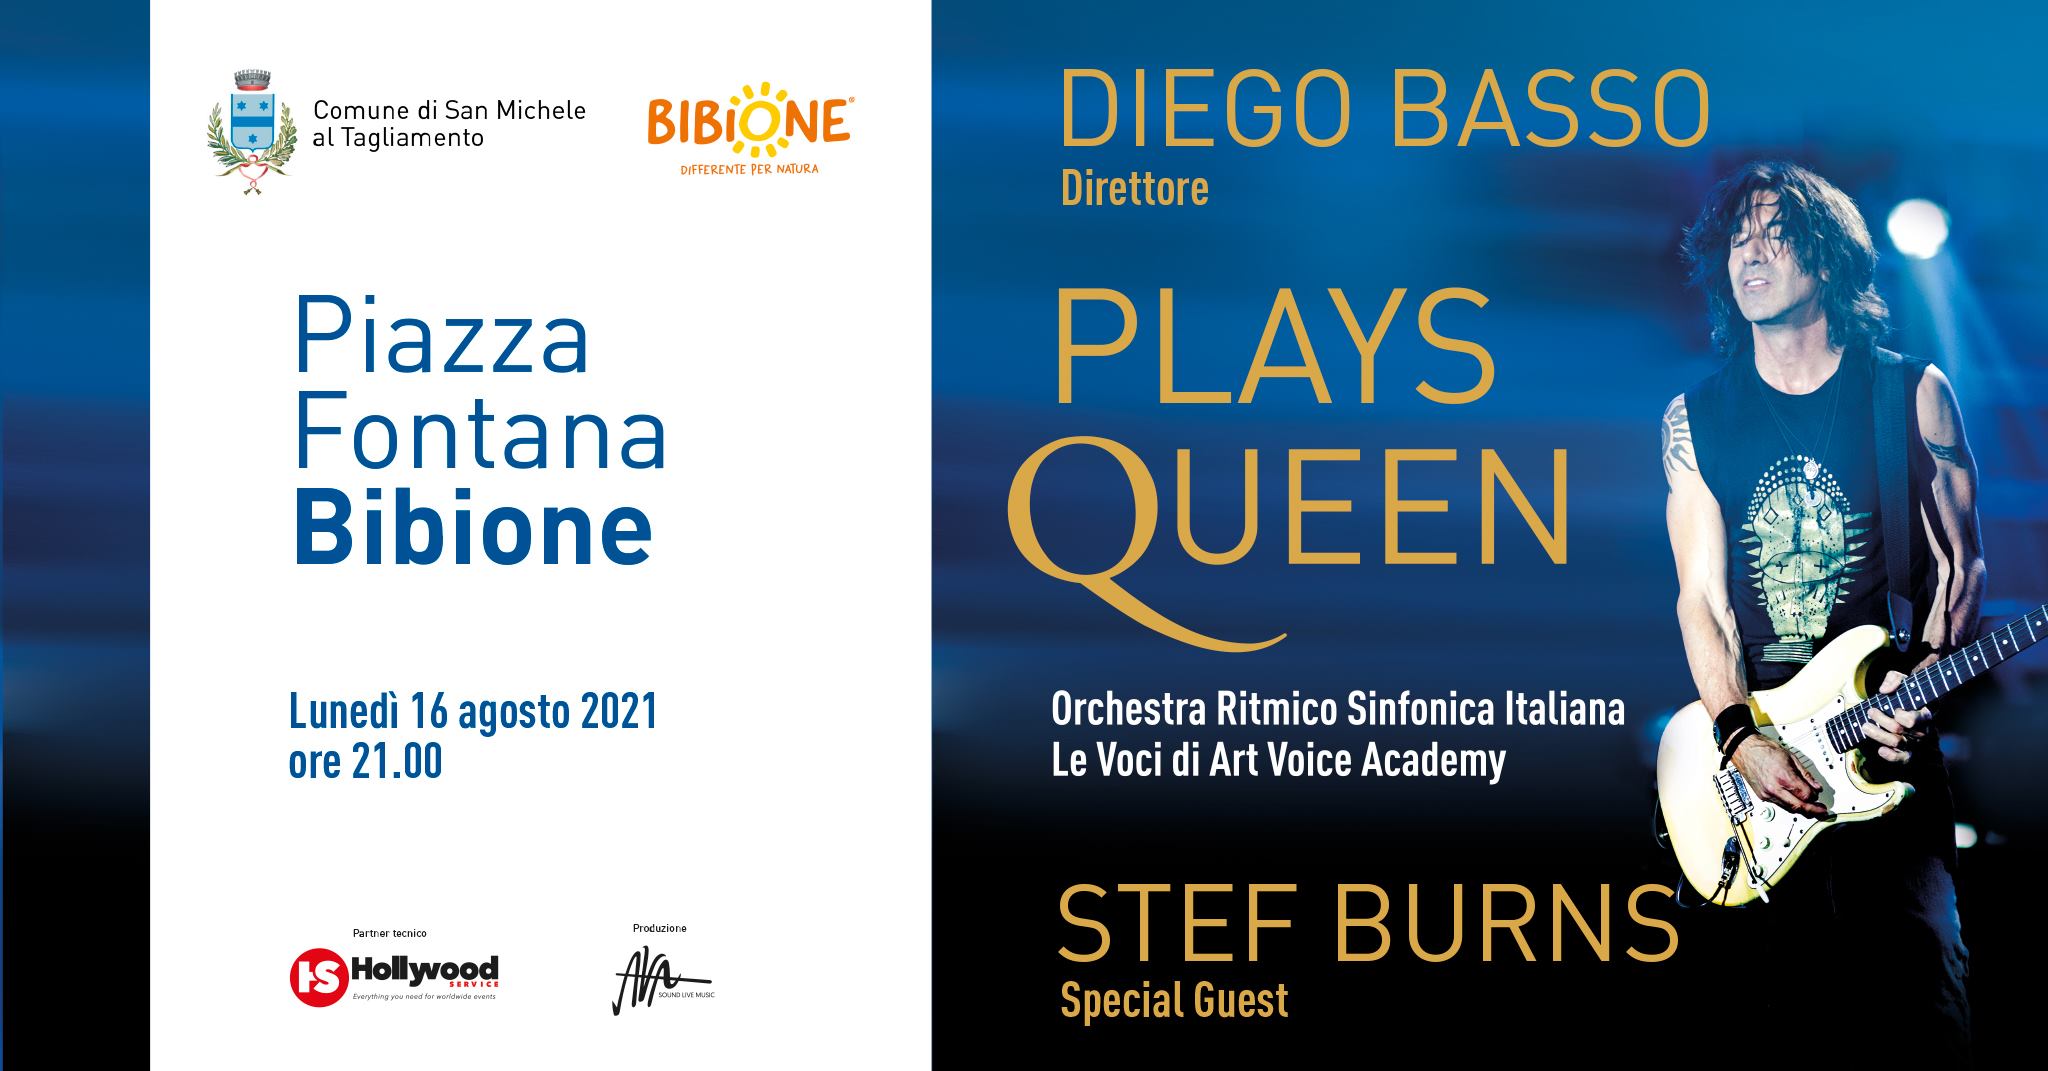 Diego Basso Plays Queen - Special Guest Stef Burns - Piazza Fontana, Bibione - EventiFVG.it